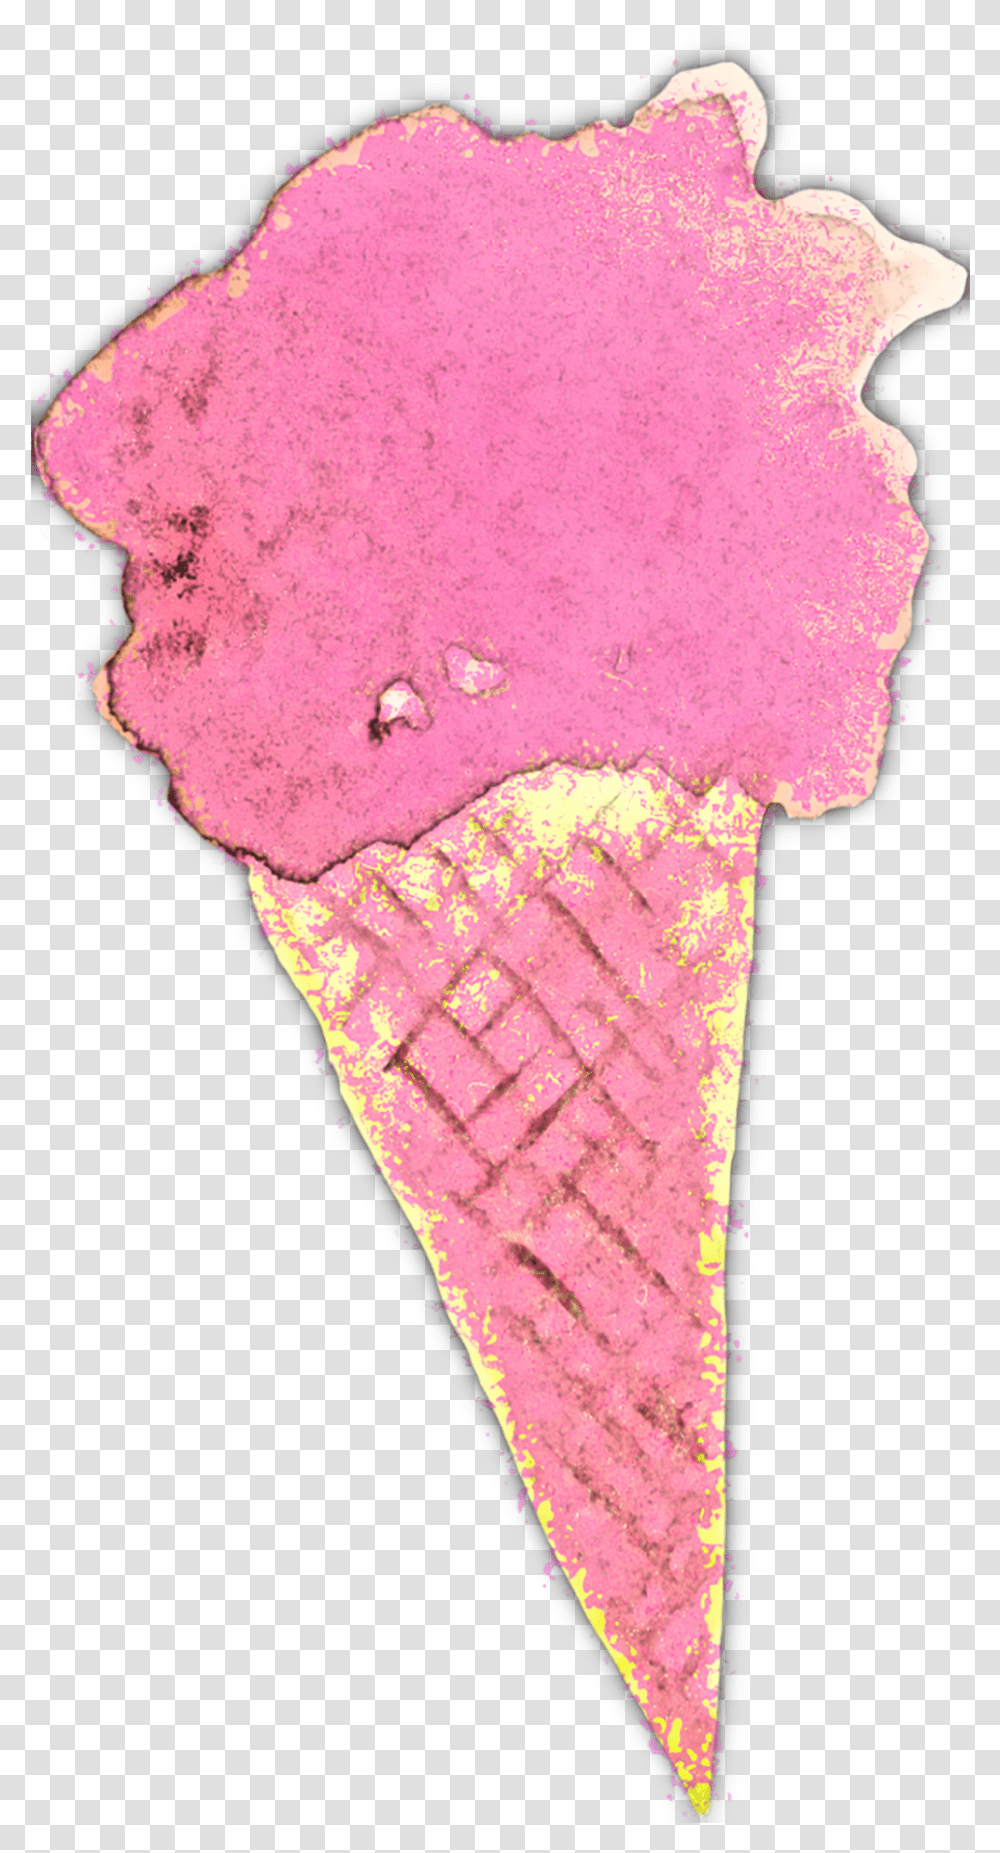 Abstract Ice Cream Cone Free Stock Cone, Dessert, Food, Creme, Sweets Transparent Png